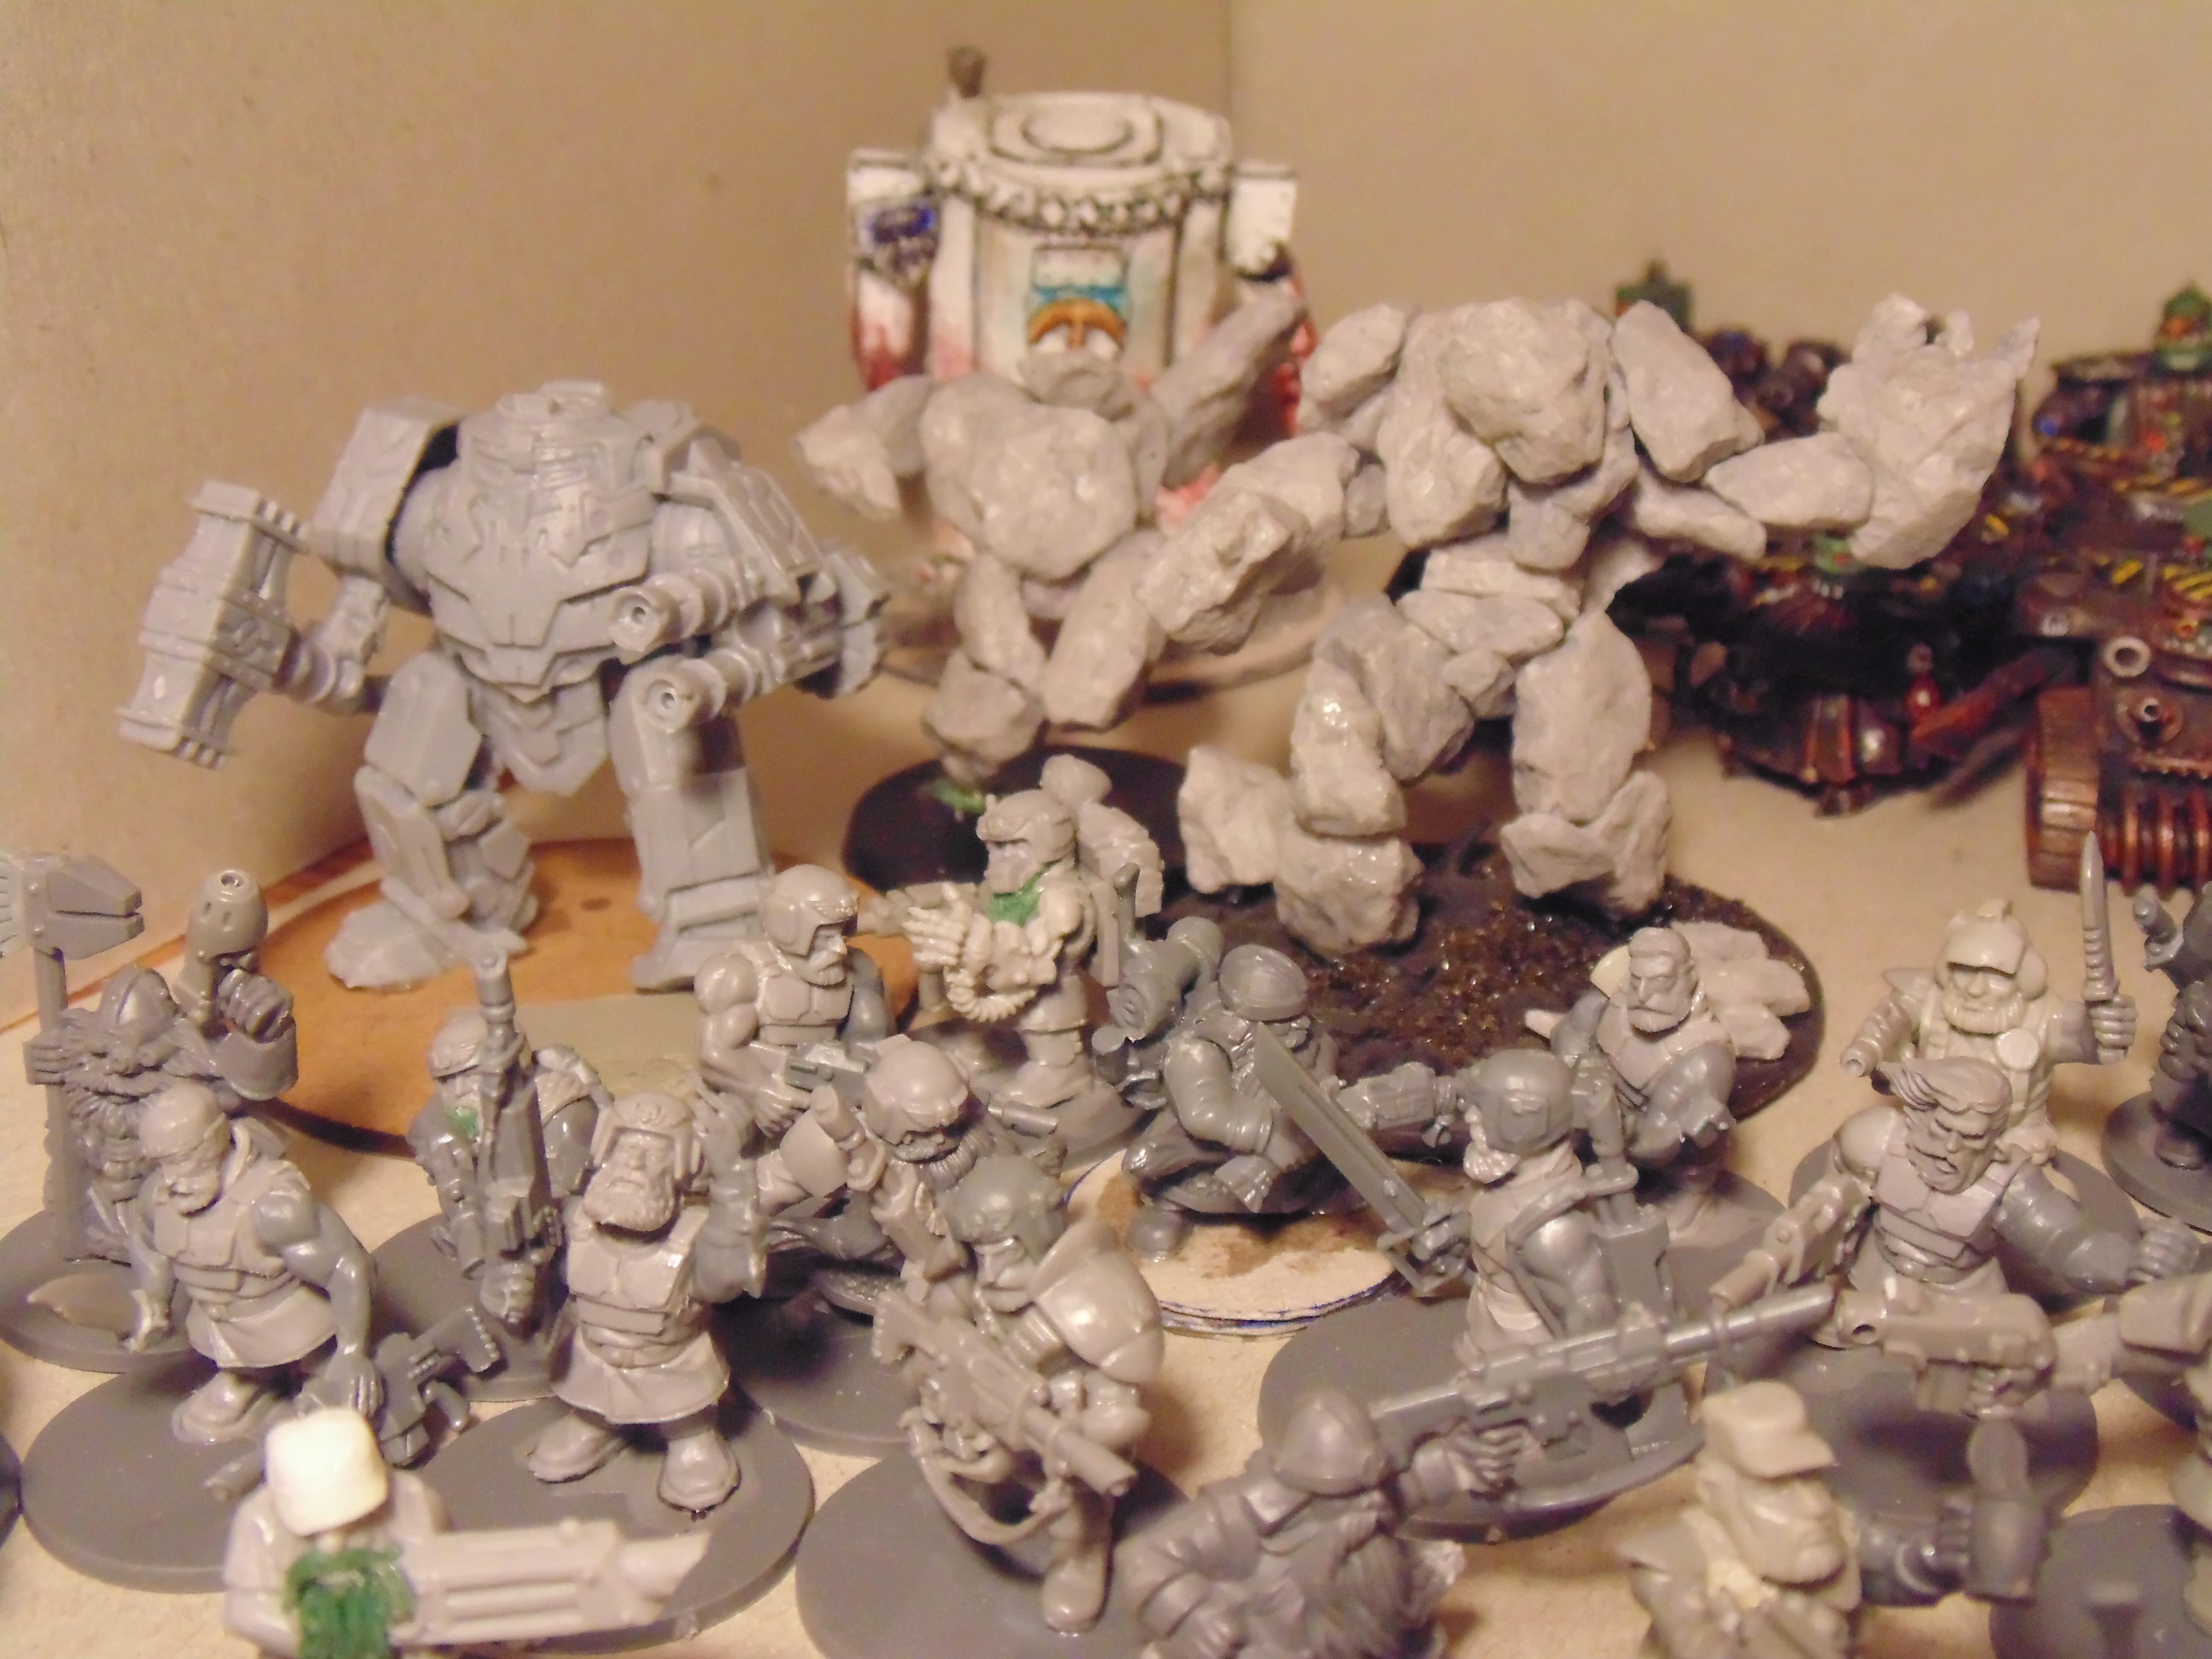 Army, Bike, Codex, Conversion, Creatures, Dwarves, Exo, Exosuits, Green, Heavy, Imp, Imperial, Metal, Old, Oldhammer, Rogue, School, Scratch, Scratch Build, Squad, Squats, Stone, Stuff, Suit, Trader, Votann, White